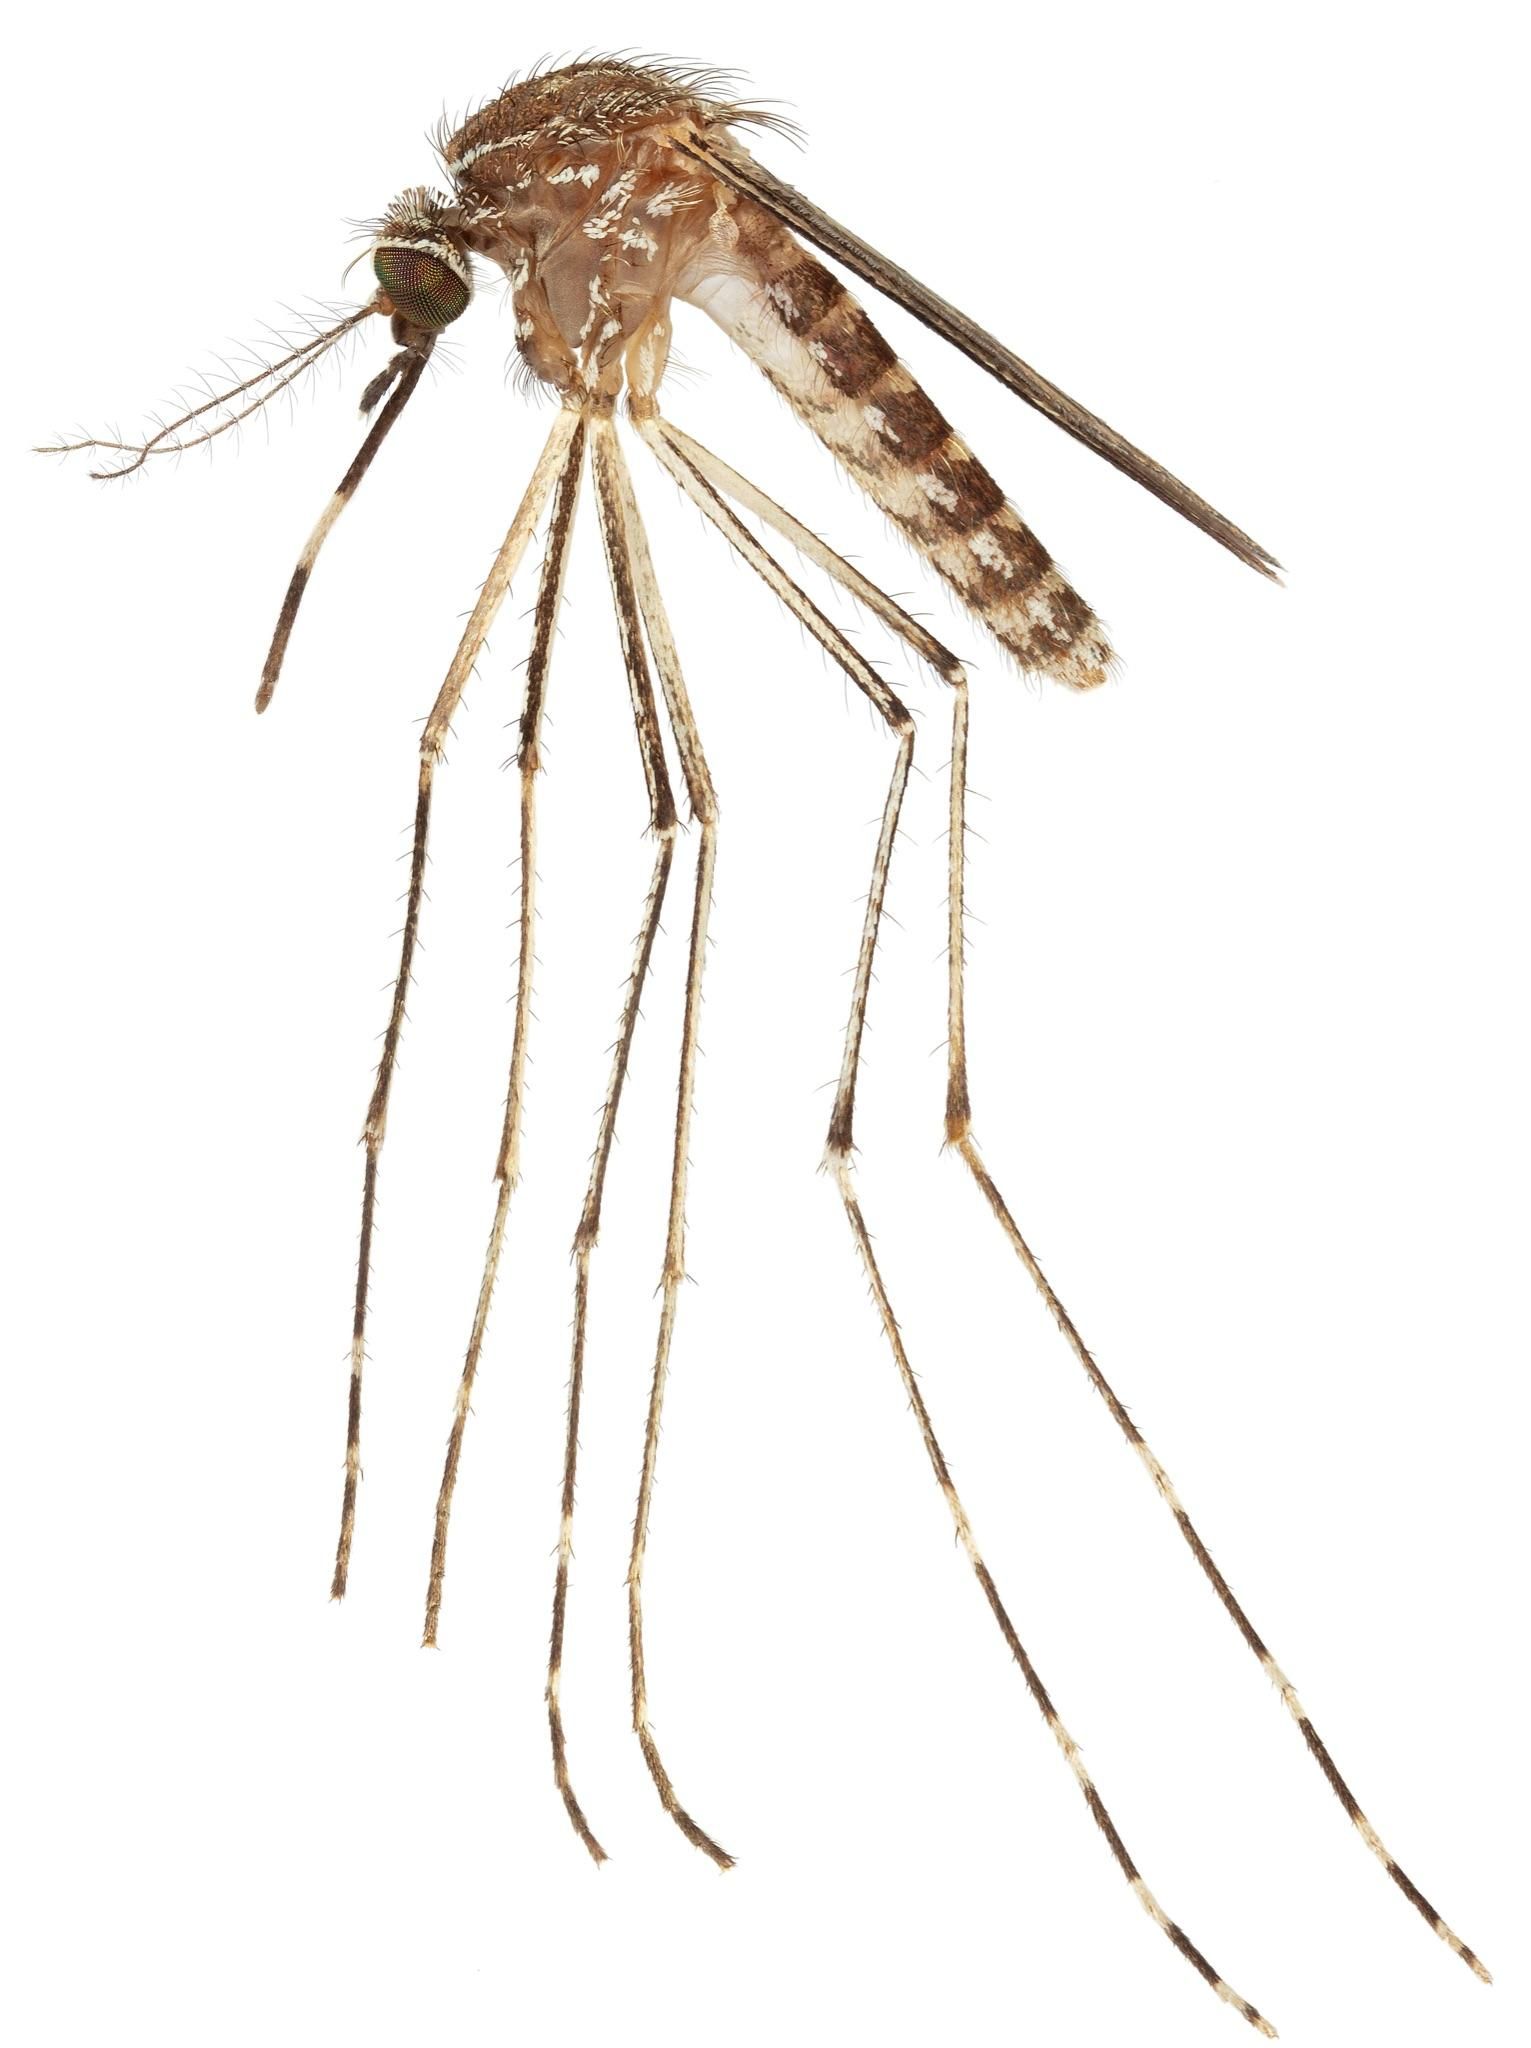 Adult female Culex tarsalis, an important vector for West Nile virus in the western United States, collected in Santa Cruz County, Arizona. 